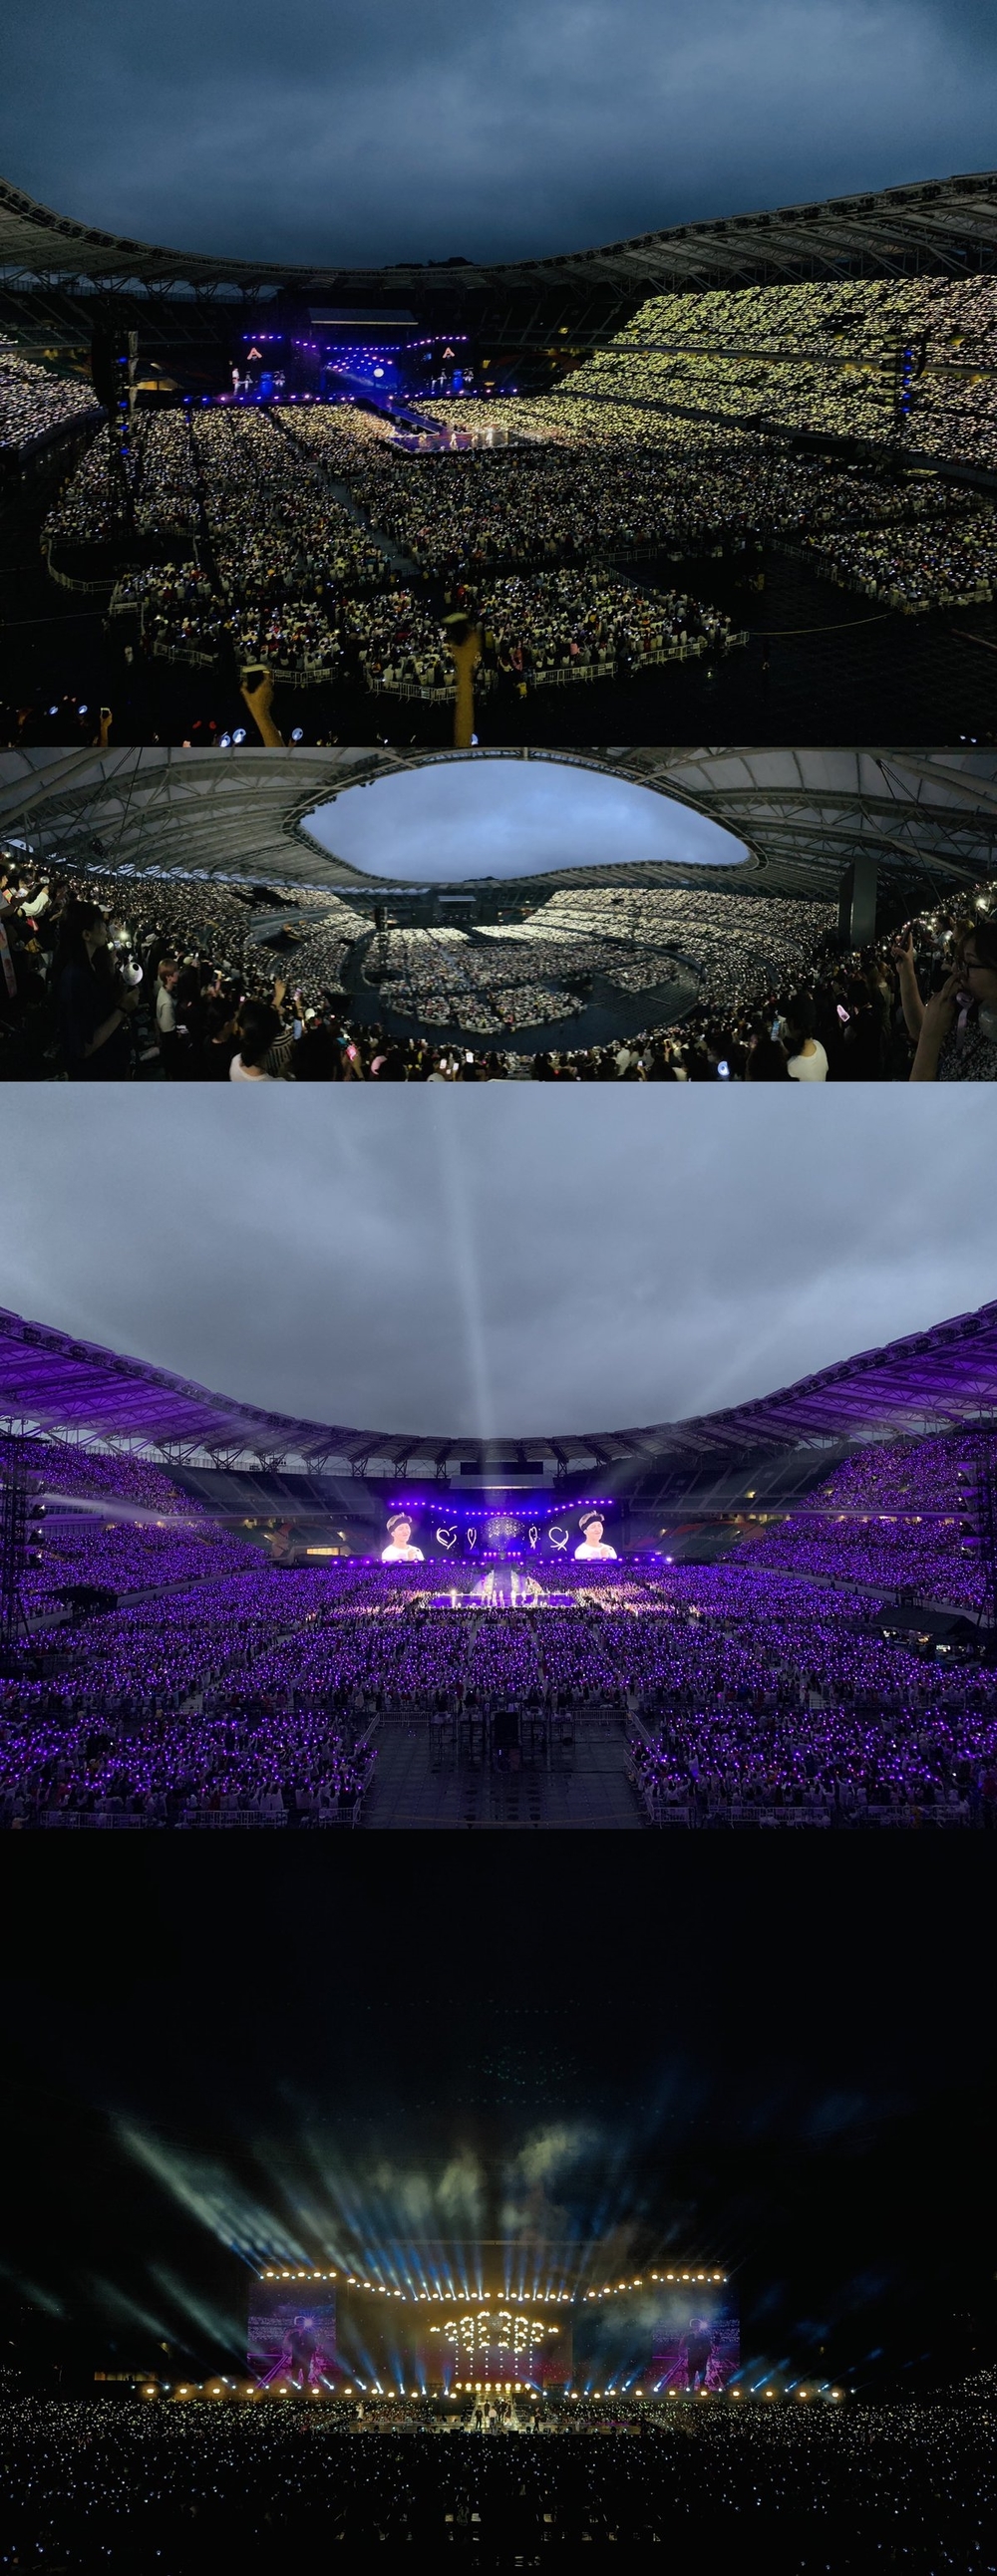 Group BTS (RM, Jean, Sugar, Jay Hop, Ji Min, Bu, and Jung Guk) finished the Japan AT & T Stadium tour in Shizuoka.On the afternoon of July 14, BTS official SNS operated by its agency Big Hit Entertainment said, [#Todays Bulletproof] Hello, Shizuoka!BTS= ARMY The concert is forever together, so # Shizuoka 2nd performance and a picture of the waiting room of the BTS concert was posted.Photos were also released through the official BTS Japan SNS.BTS held a performance of LOVE YOURSELF: SPEAK YOURSELF – JAPAN EDITION (Love Yourself: Speak Yourself) - Japan Edition at the AT & T Stadium Ecopa in Shizuoka on the 13th.Earlier, BTS launched its AT & T Stadium tour in Chicago, New Jersey, Brazil, Sao Paulo, London, France, Paris and Japan Osaka, starting with United States of America Los Angeles in May.BTS will hold a concert at King Fad International AT&T Stadium in Riyadh, the capital of Saudi Arabia, on October 11 (local time).BTS is the first overseas singer to perform AT & T Stadium alone in Saudi Arabia.As a result, BTS will be on 17-time AT & T Stadium tours in nine cities around the world, to Saudi Arabia Riyadh.hwang hye-jin